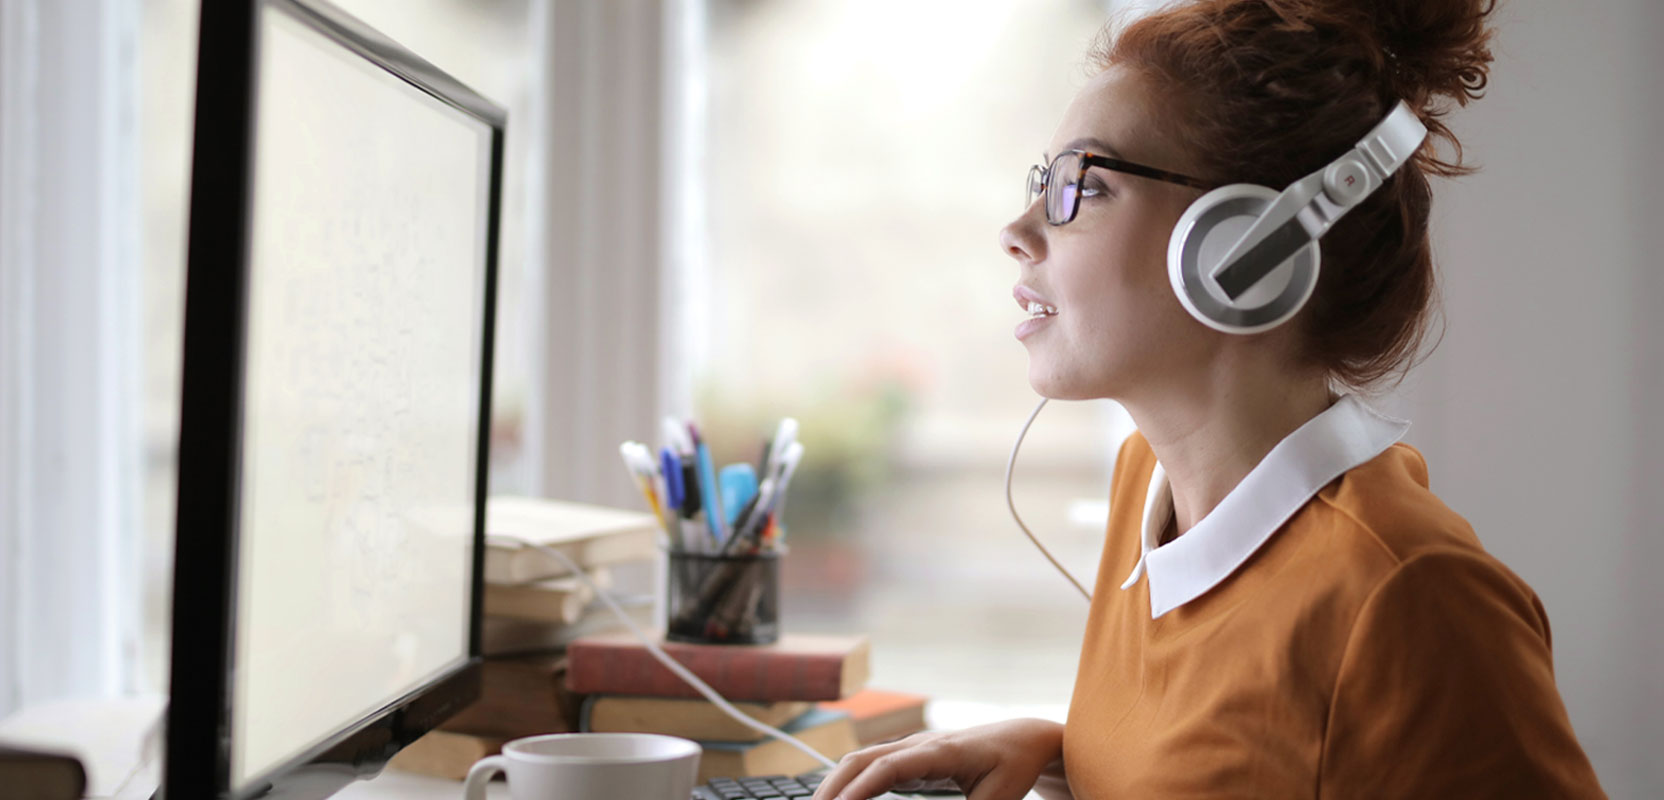 Freelance transcriptionist working at her computer and wearing headphones